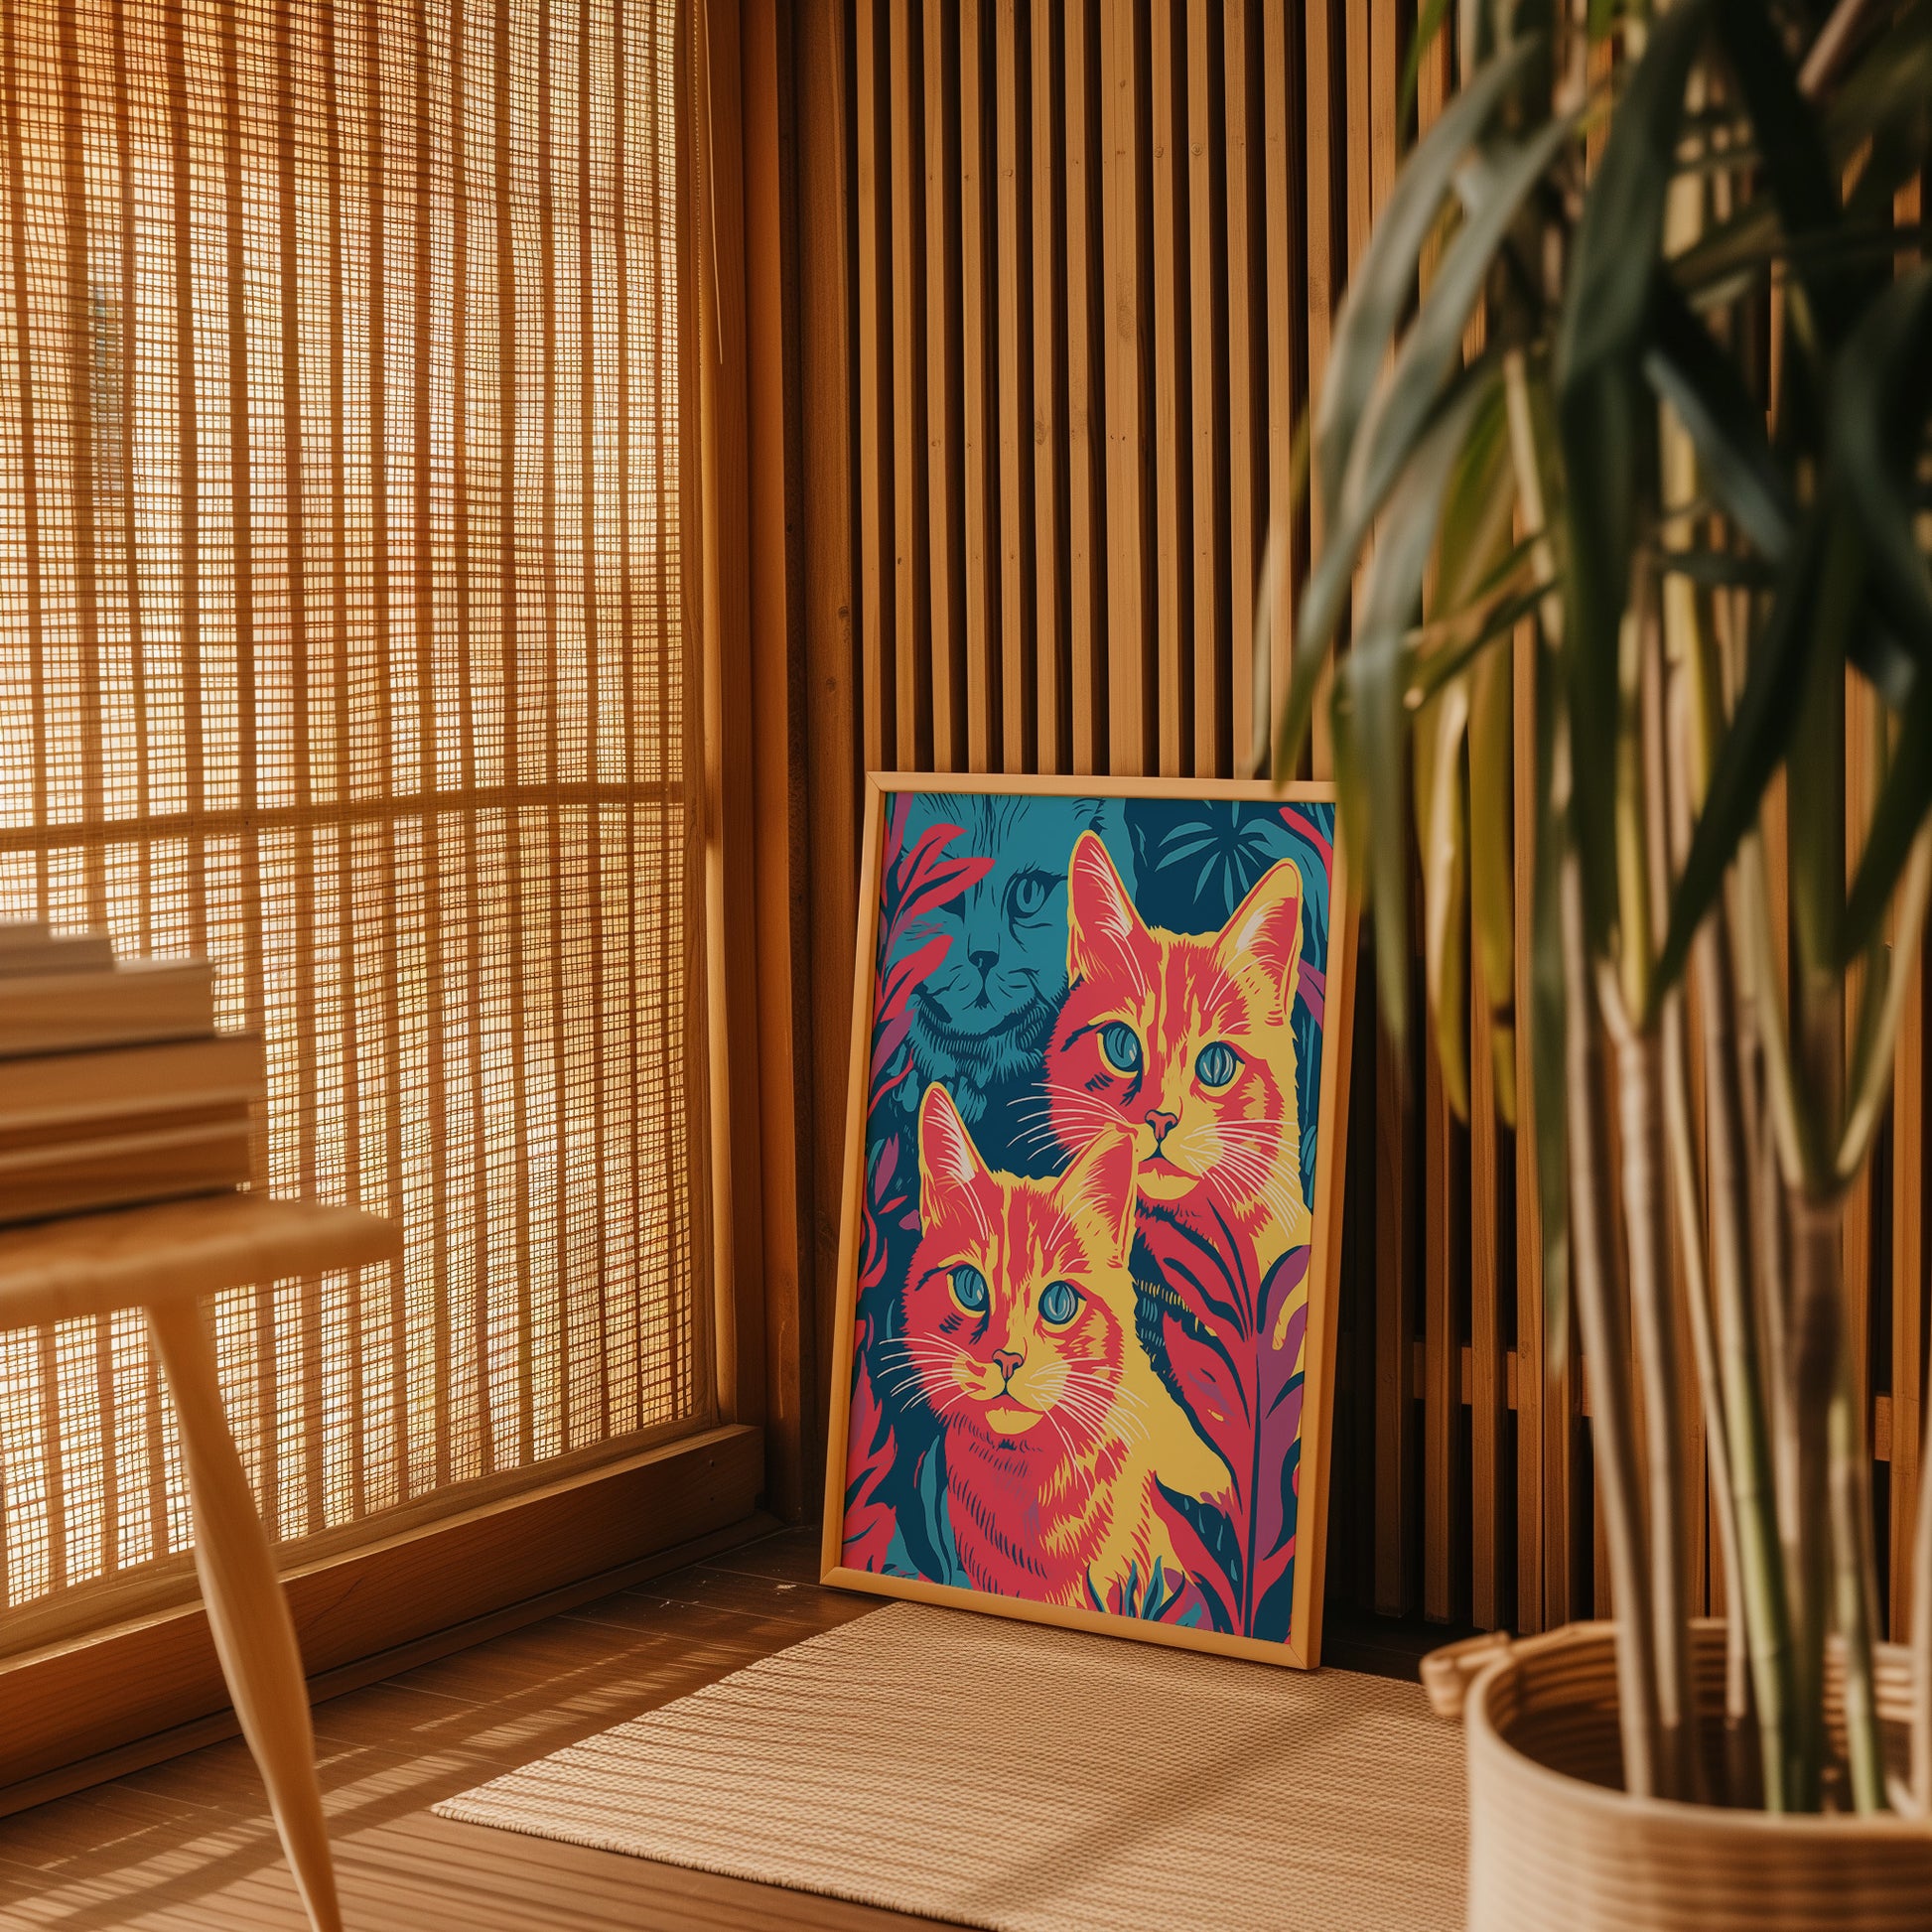 Colorful cat painting next to a potted plant, with blinds and wooden slats in the background.